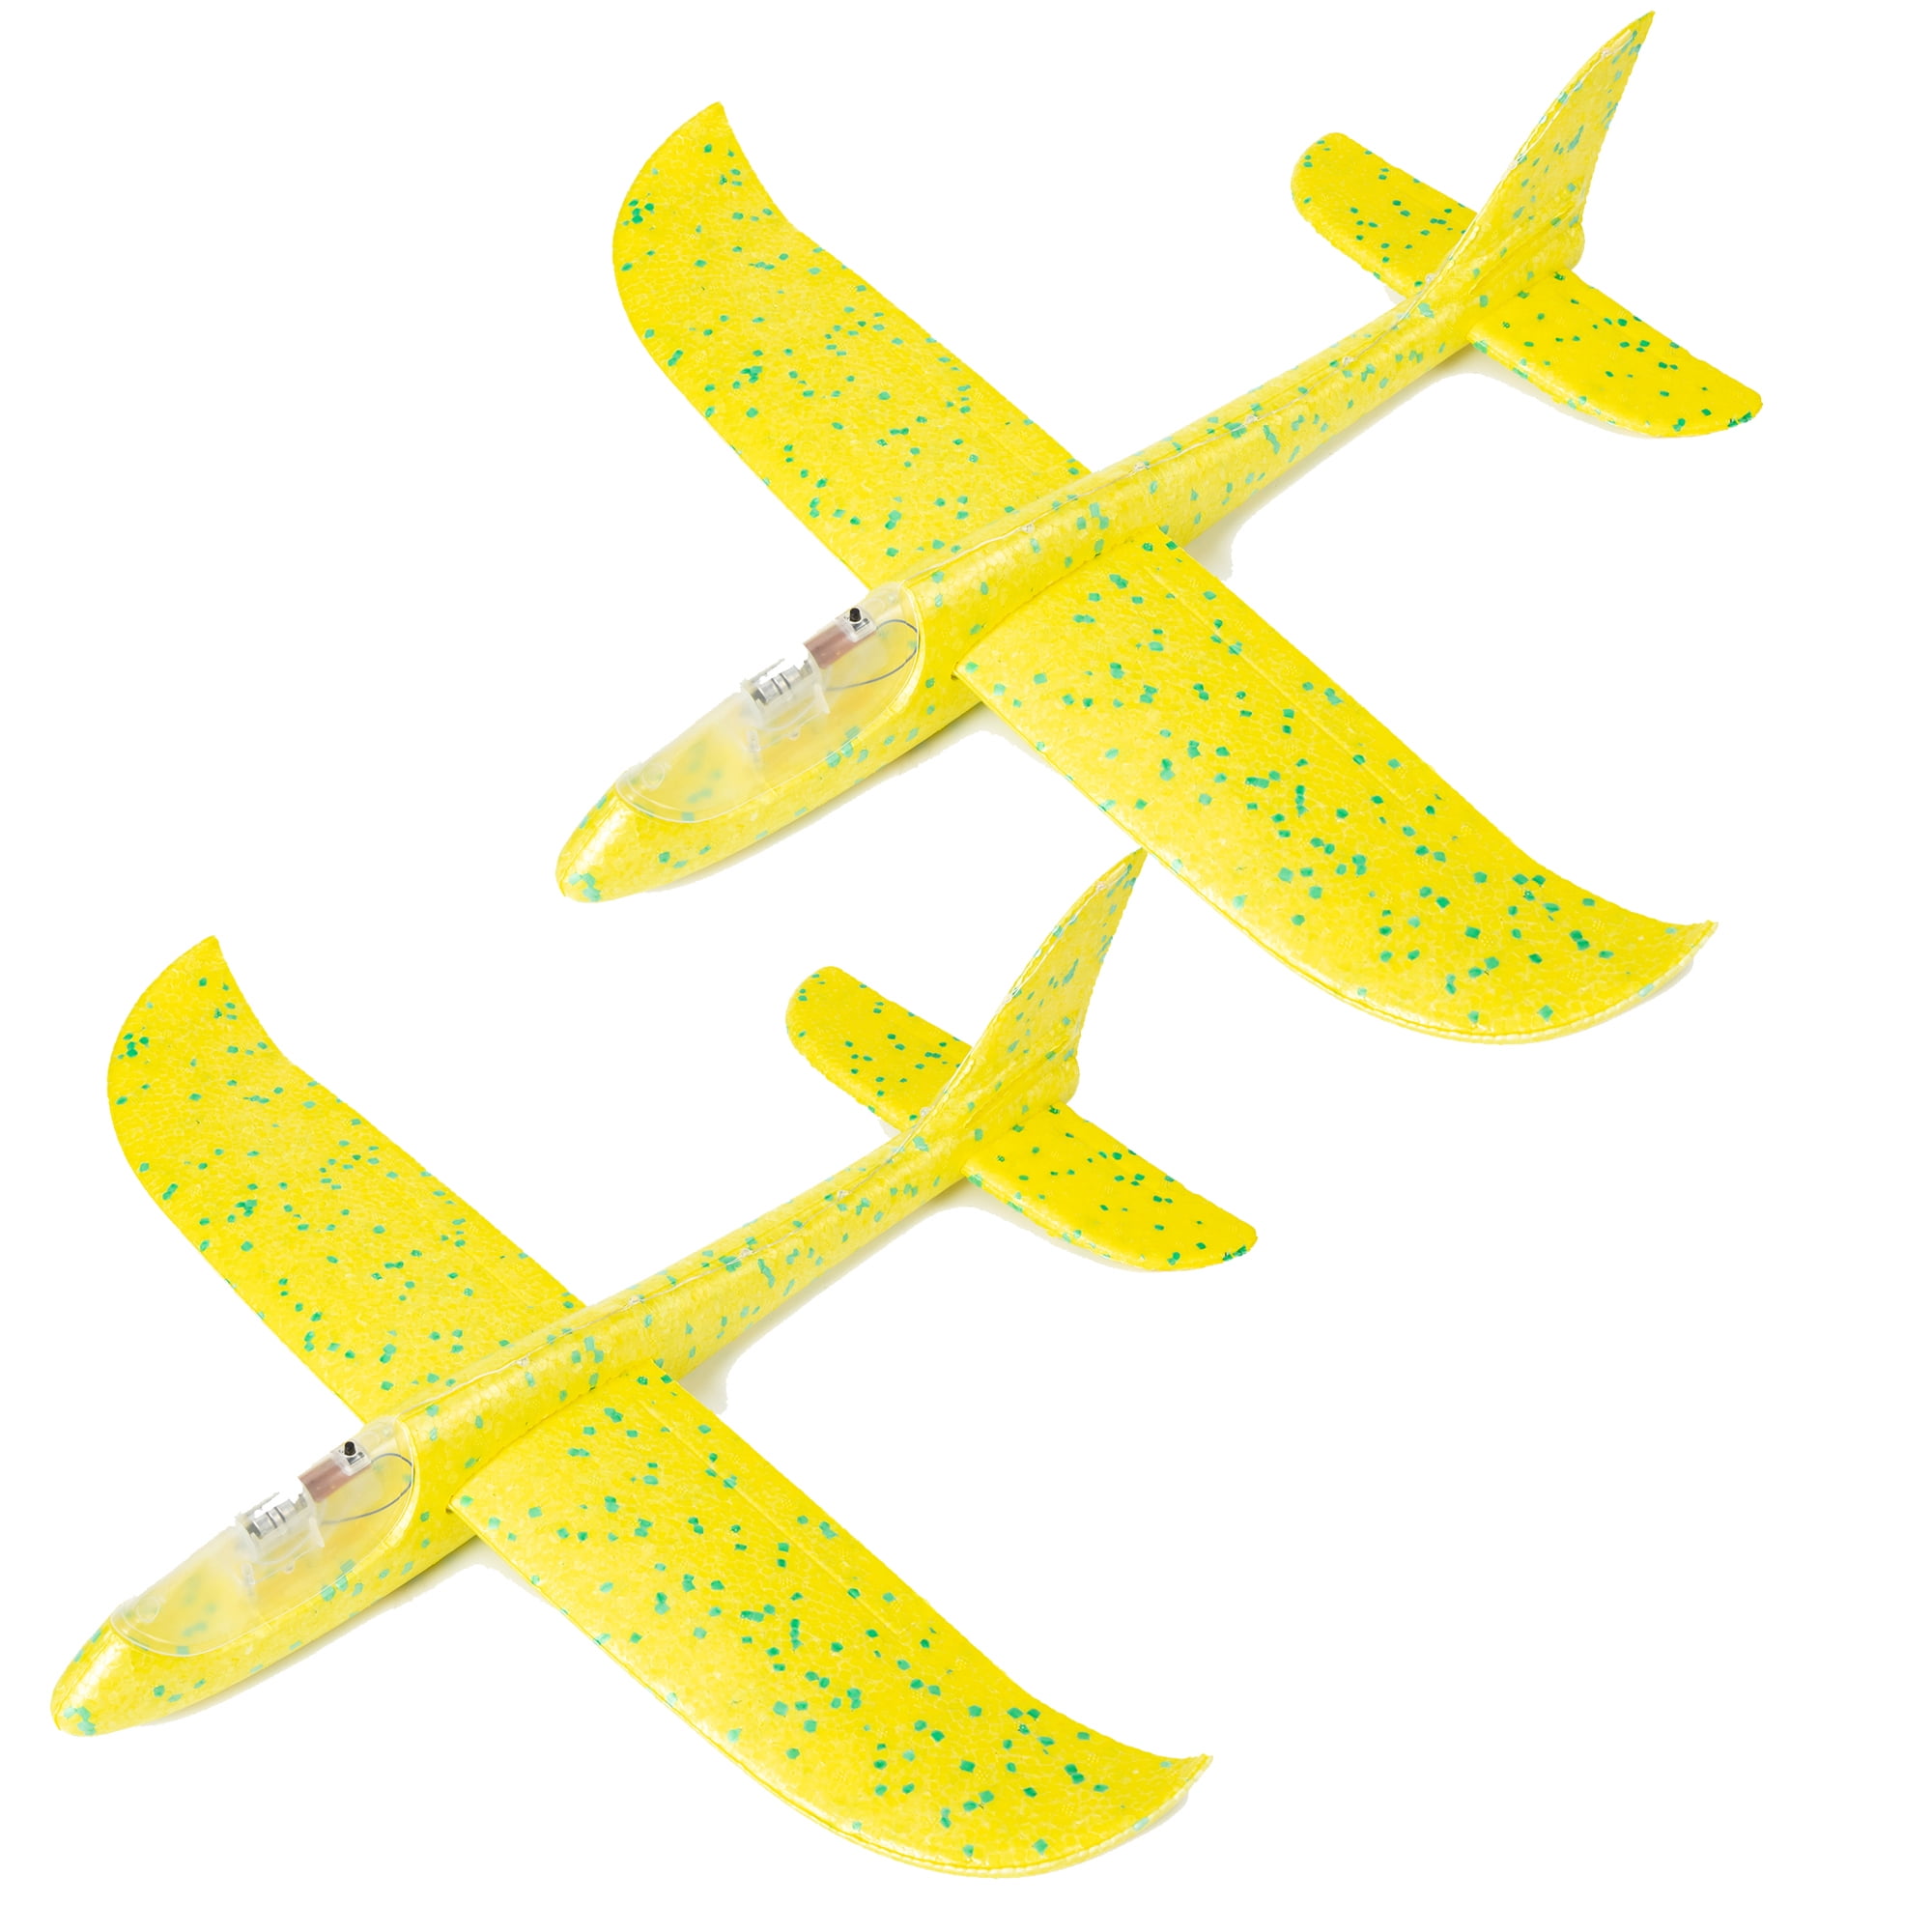 Outdoor Yard Sport Family Game Flying Party Favours Foam Airplane Toy Festival Gifts for Kids Toddlers Manual Throwing Foam Plane Gliding Throwing Maneuvering Plane 2PCS-A Airplane Toys 